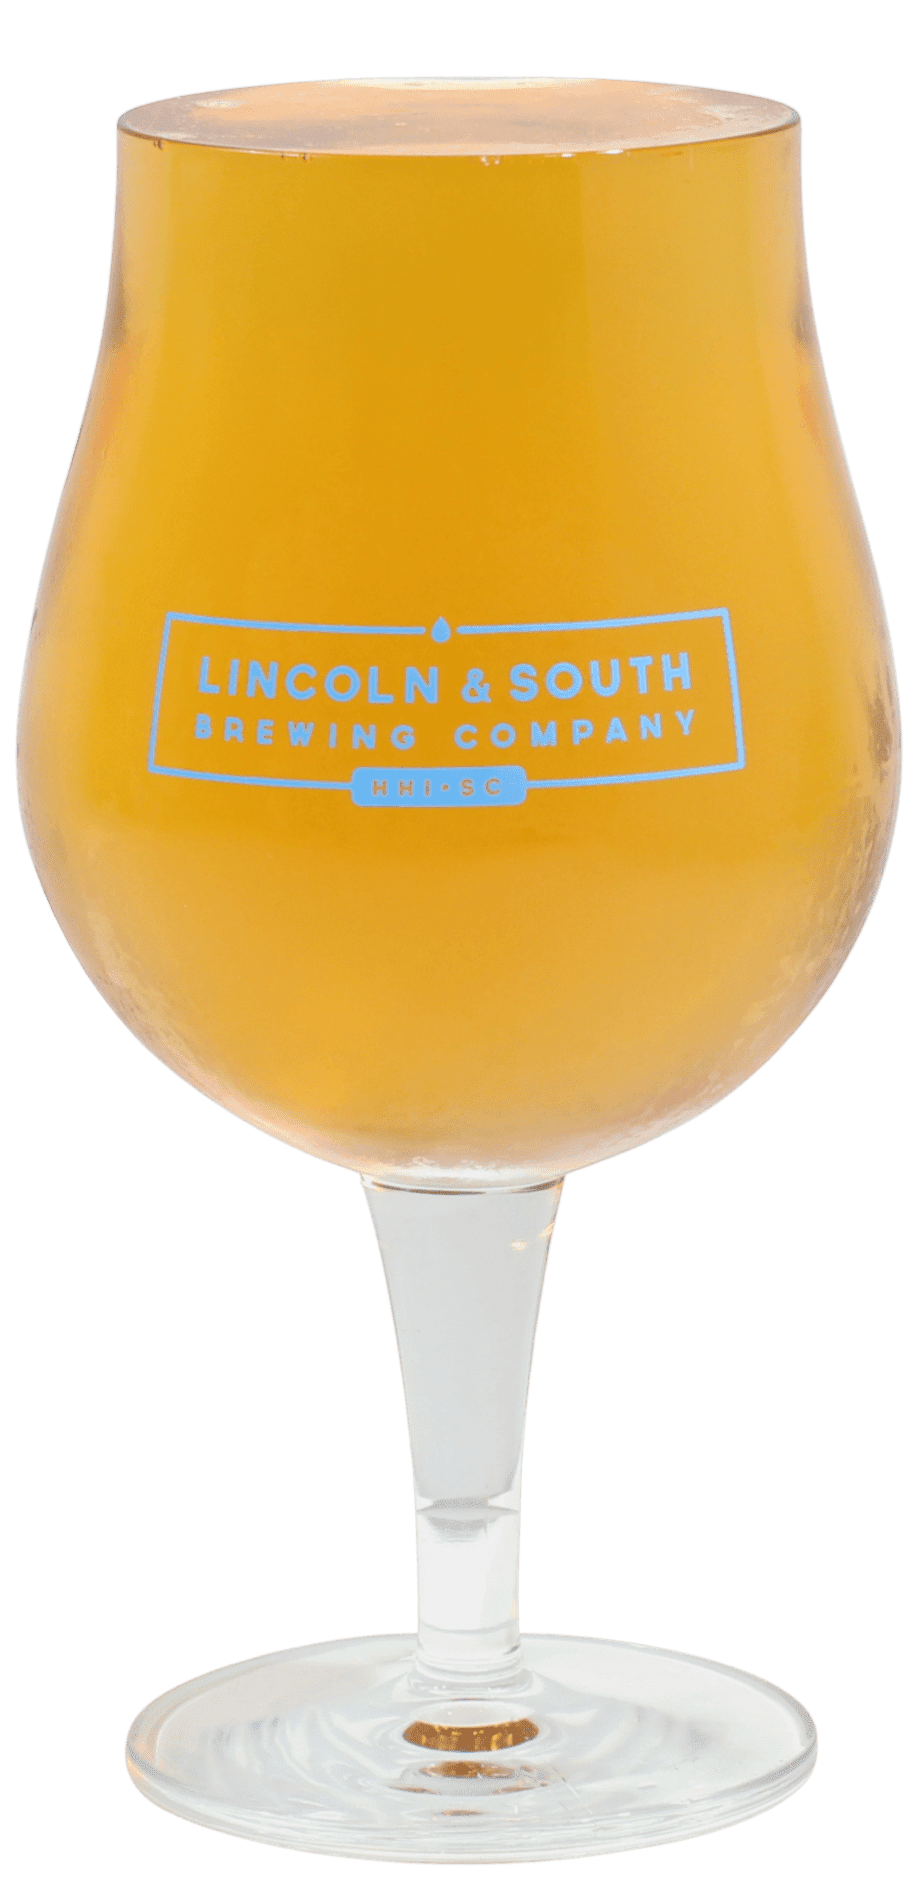 Base Sour is a sour beer offered by Lincoln & South Brewery on Hilton Head Island, SC